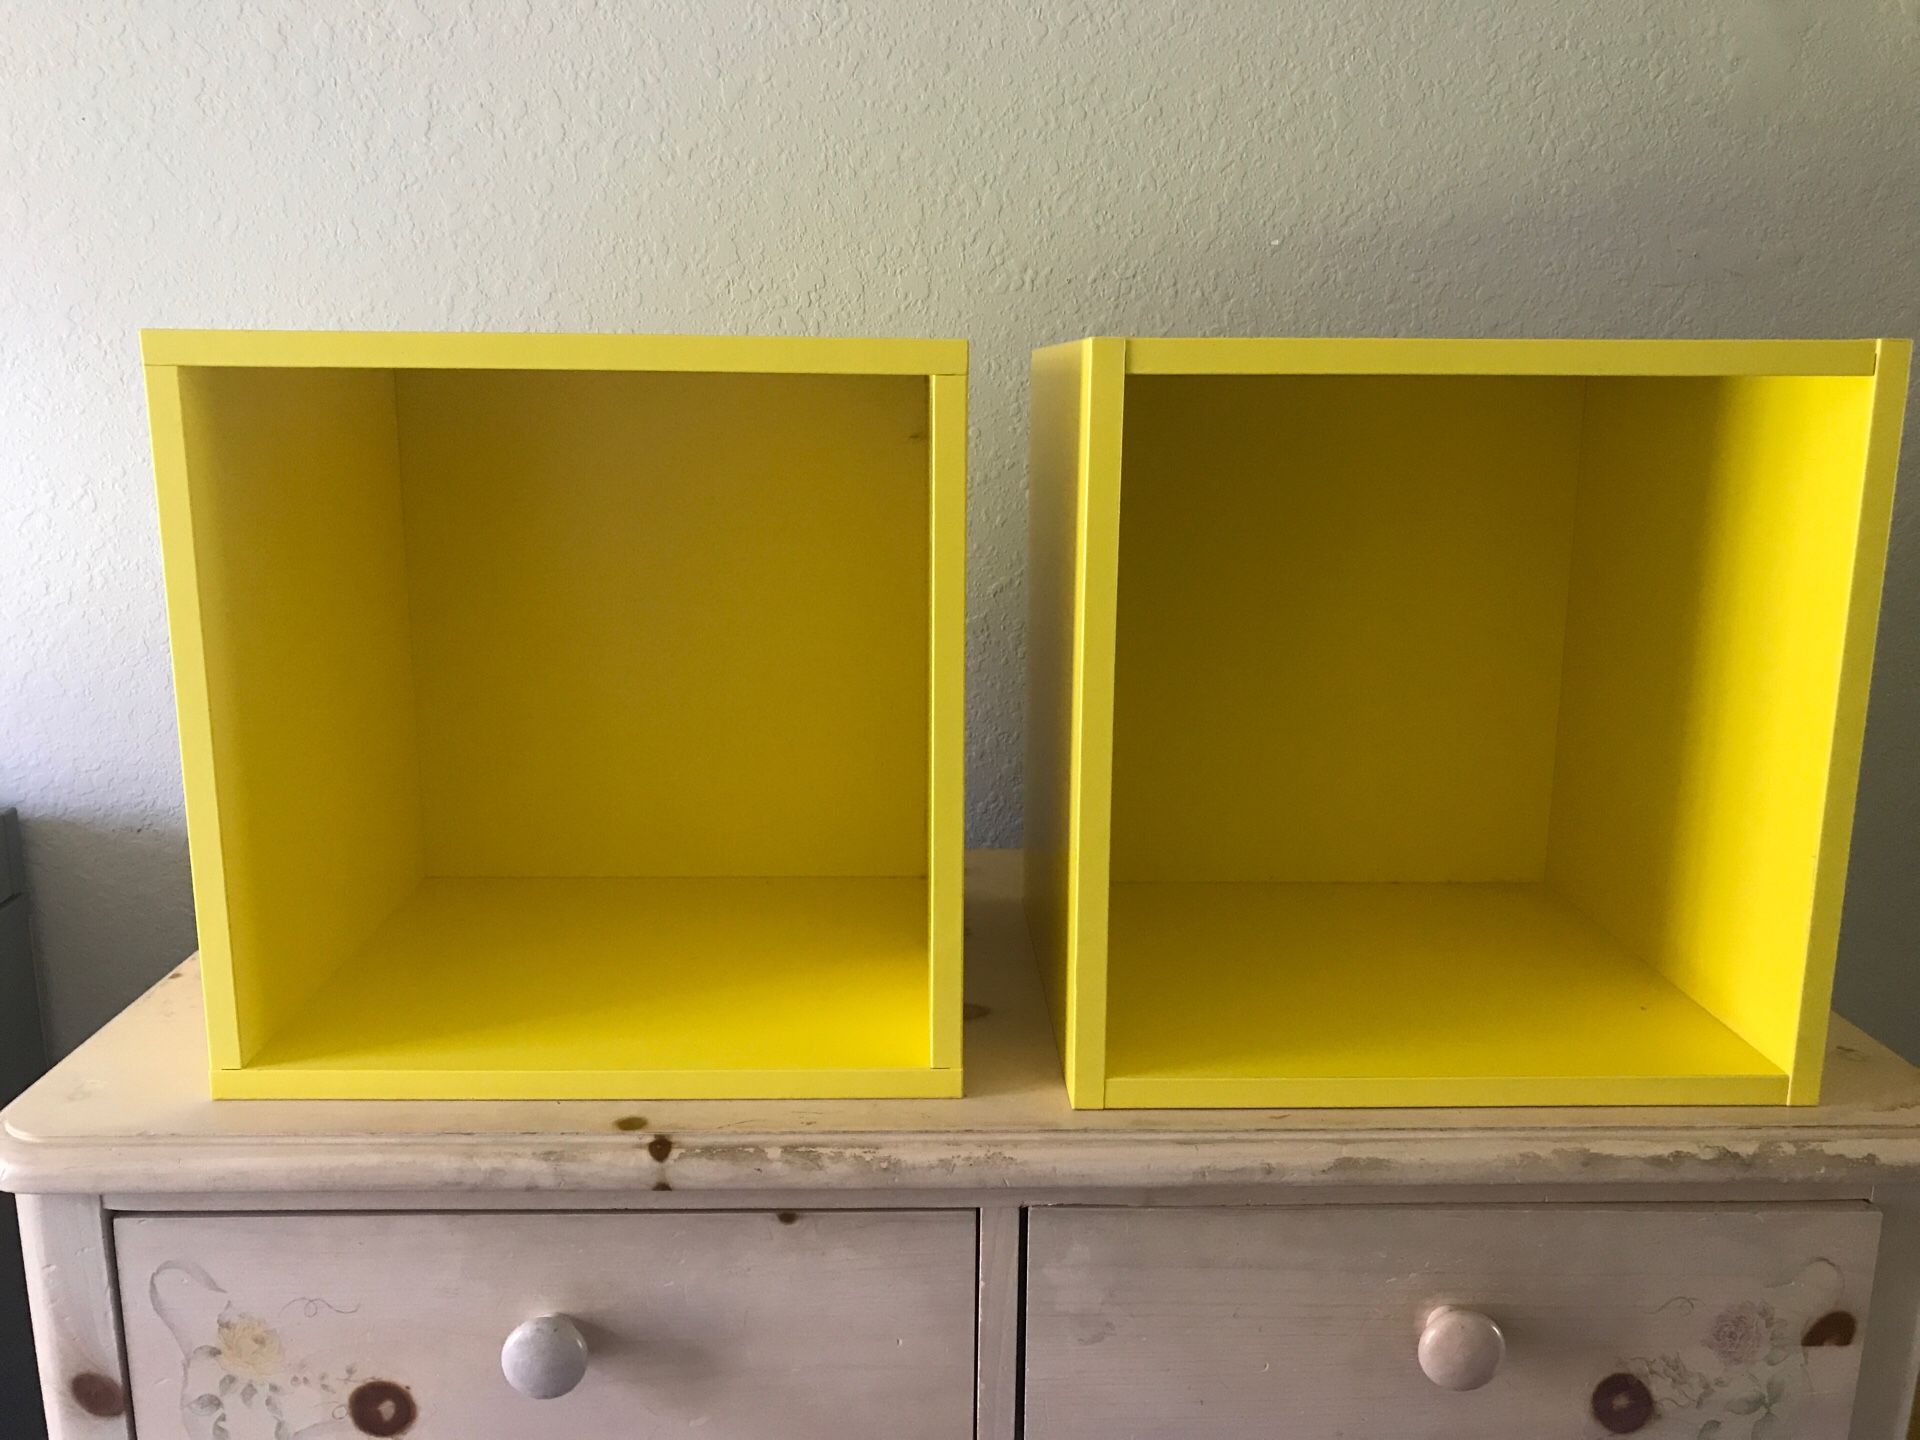 2 Cubed wall shelves